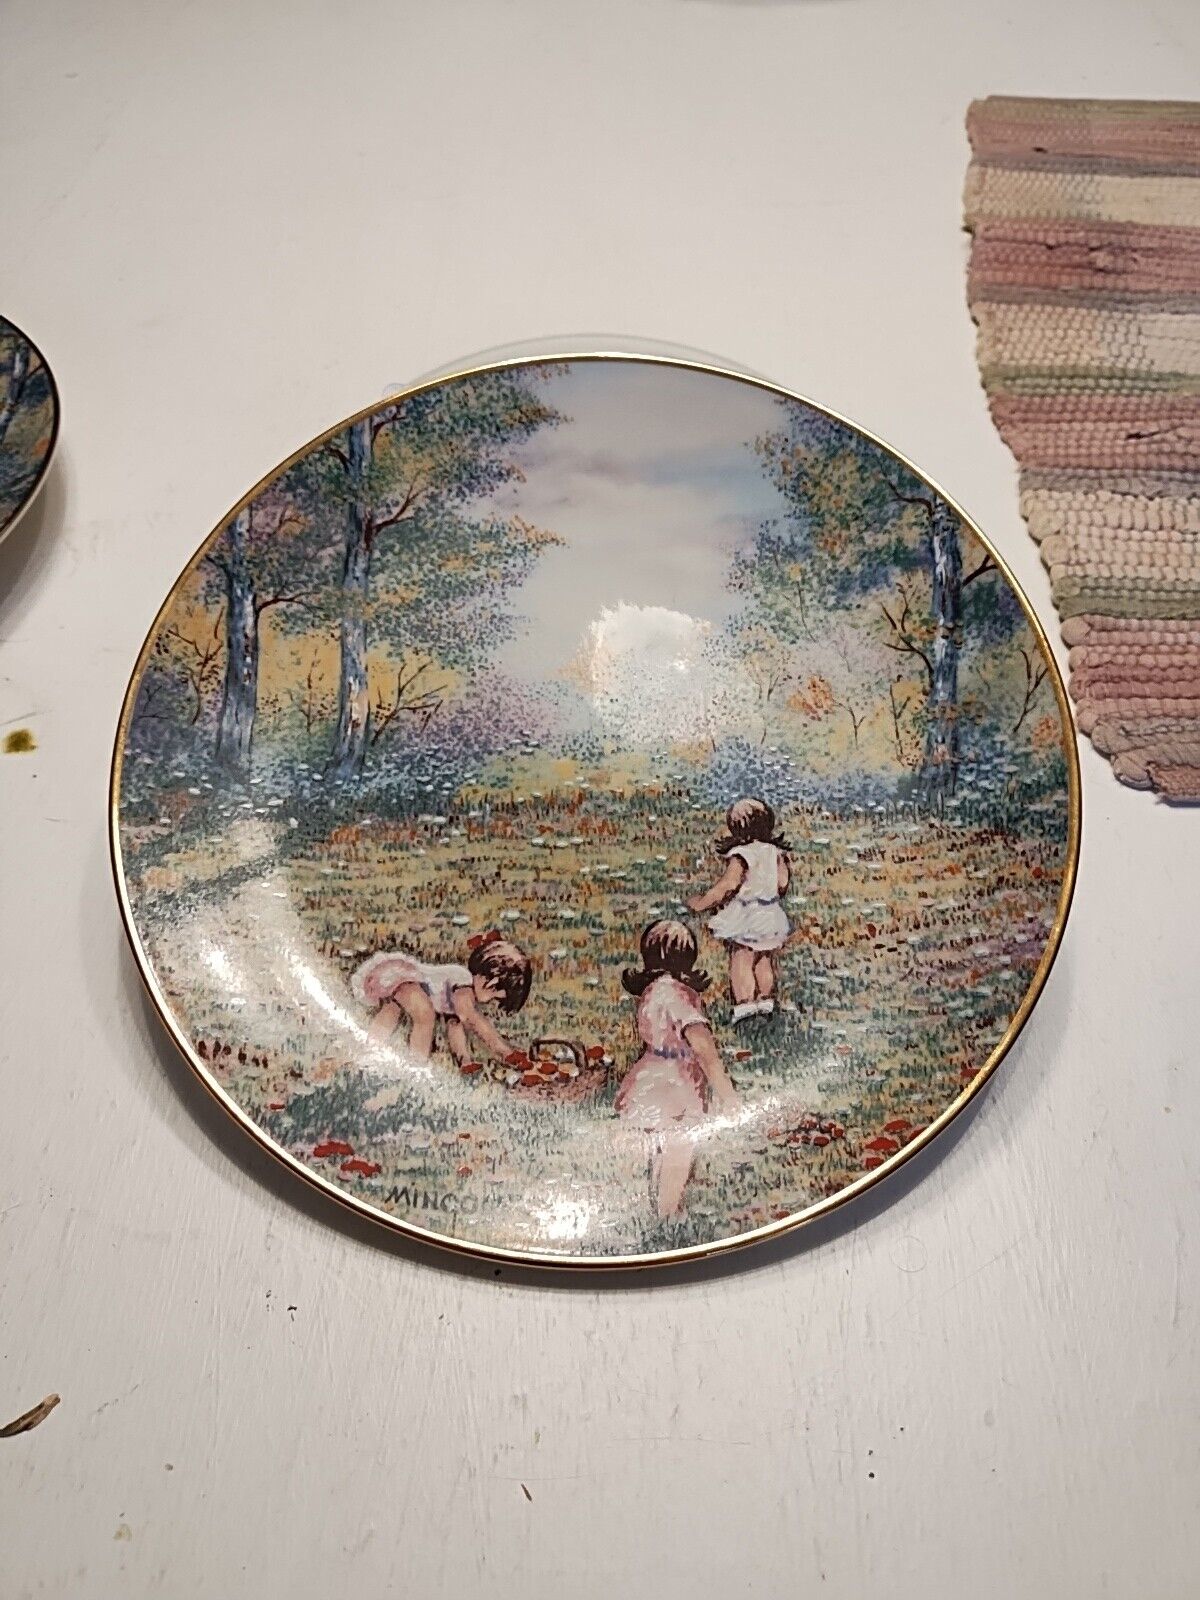 1977 CALHOUN'S COLLECTORS SOCIETY PICKING FLOWERS DOMINIC MINGOLLA PLATE